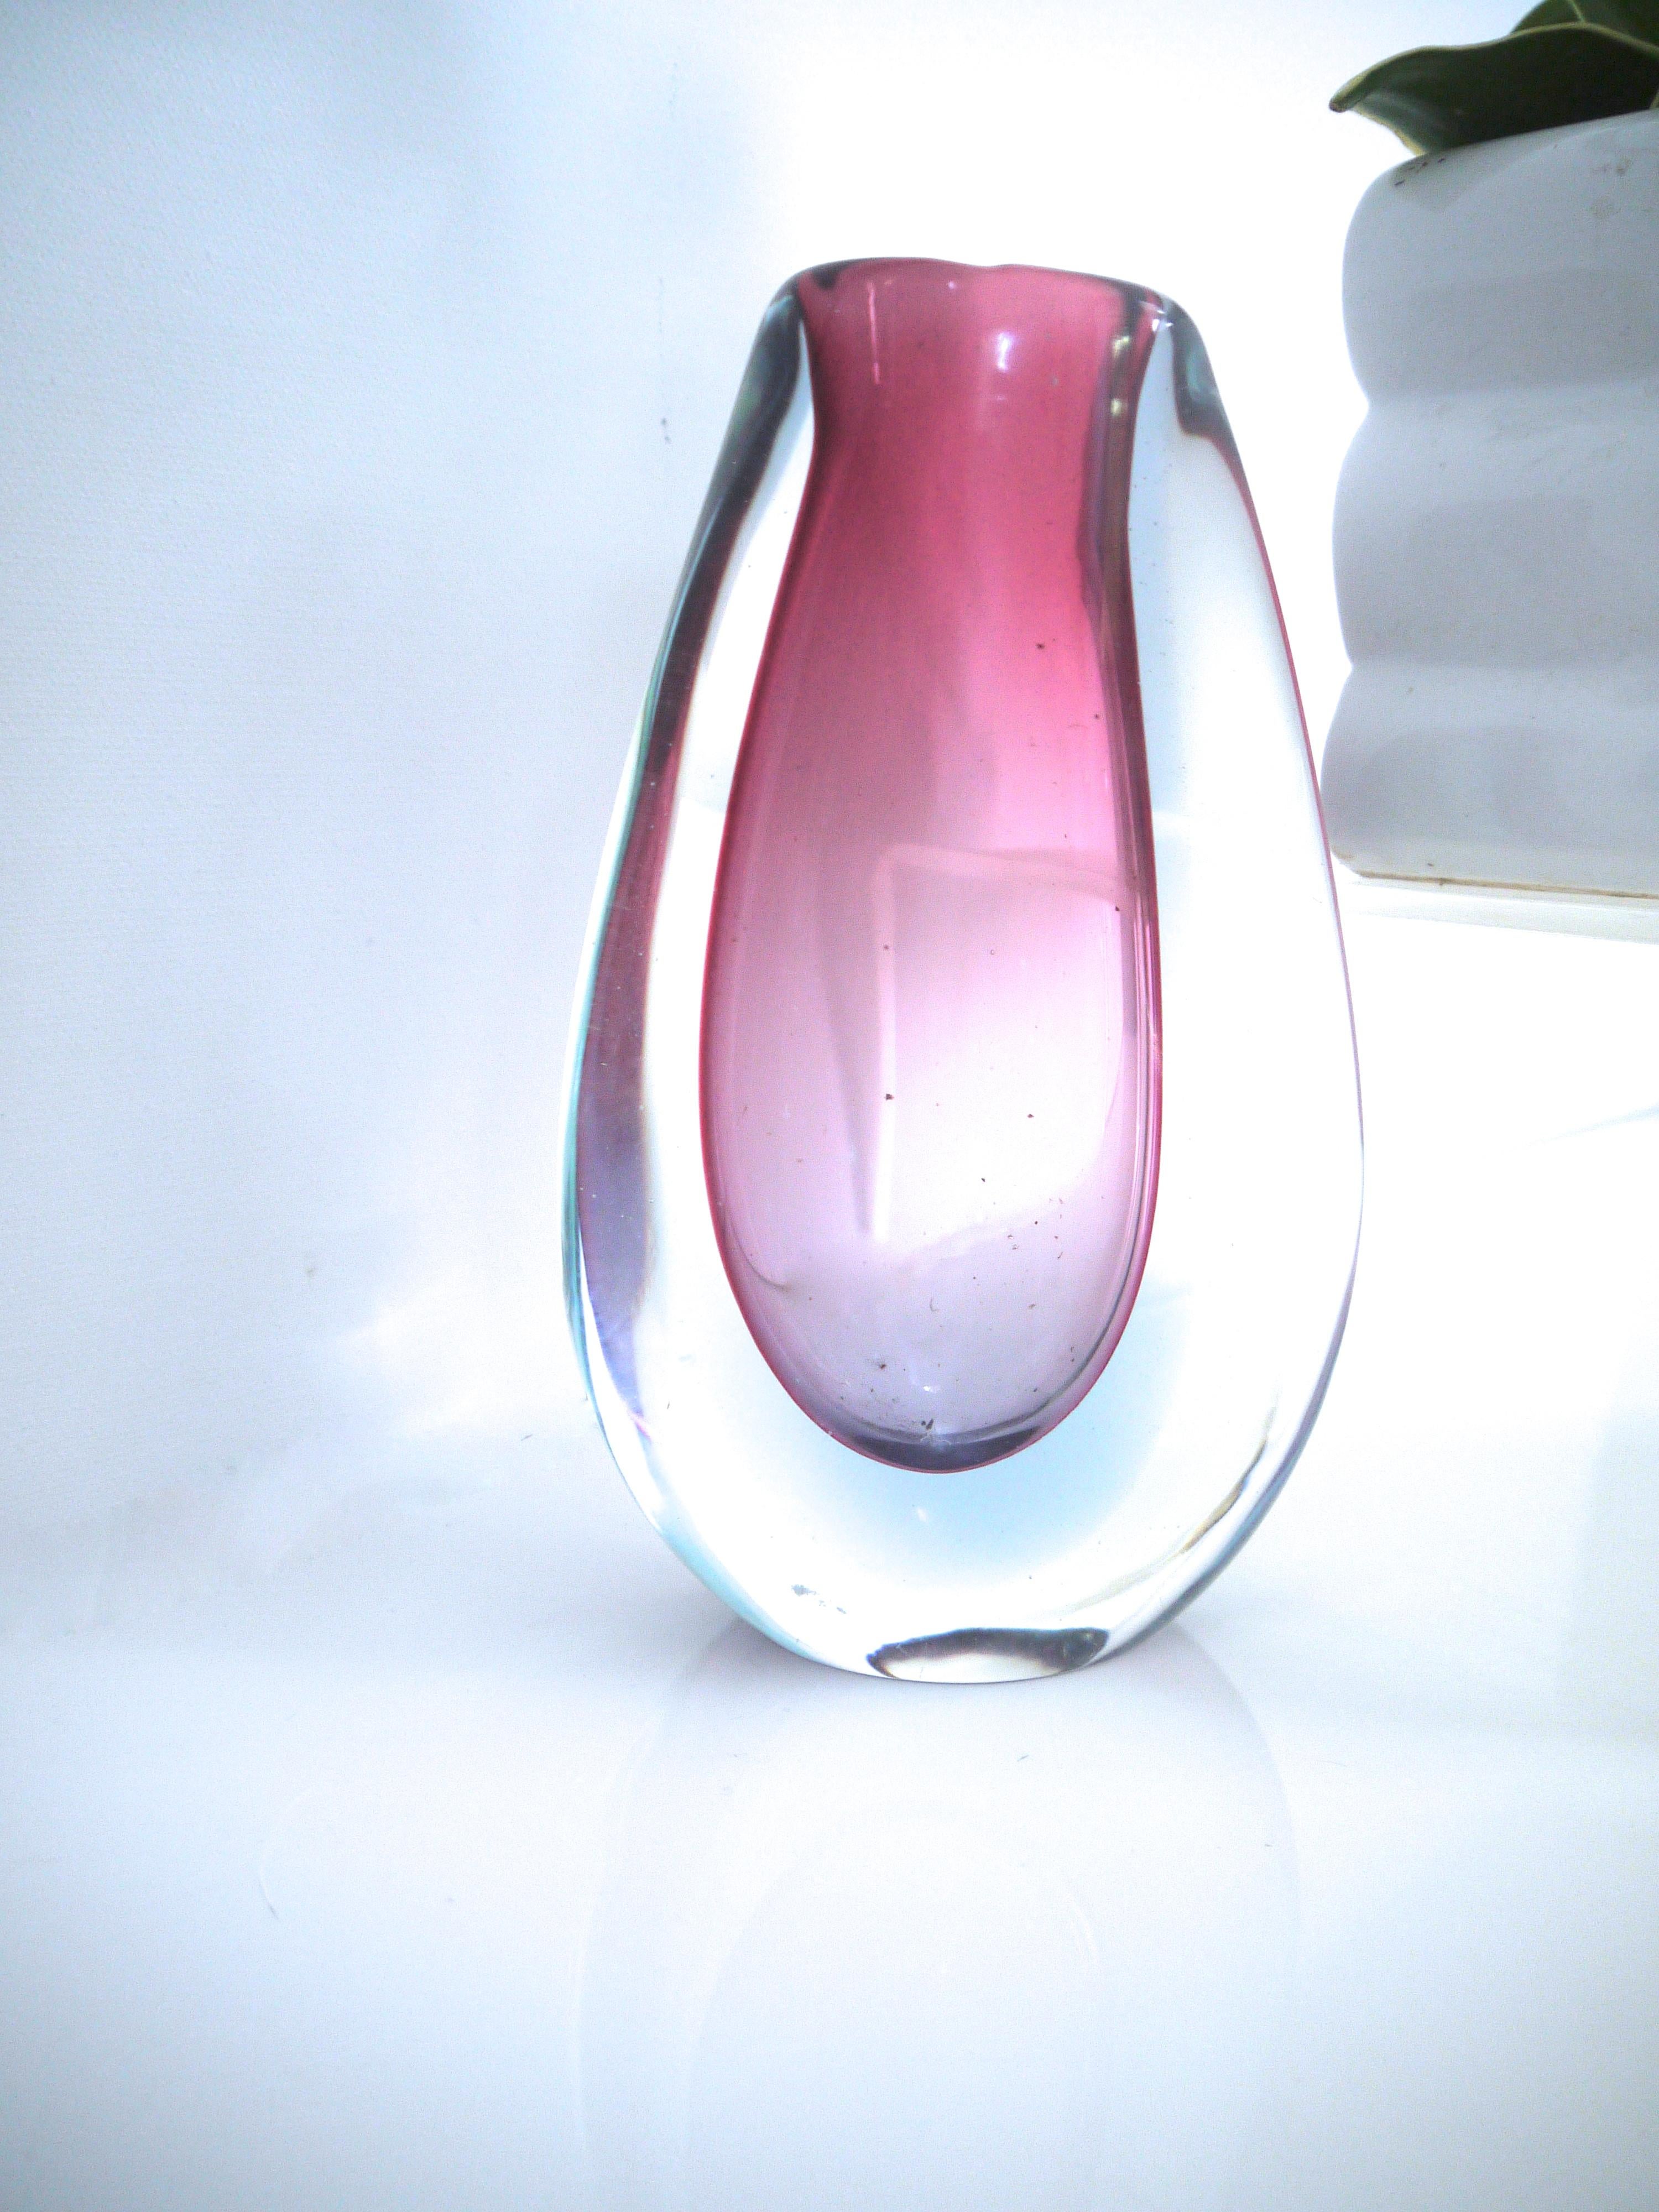 Mid-Century Modern Murano Sommerso Teardrop Vintage Art Glass Vase Late 1960s-1970s Blues and Pinks For Sale